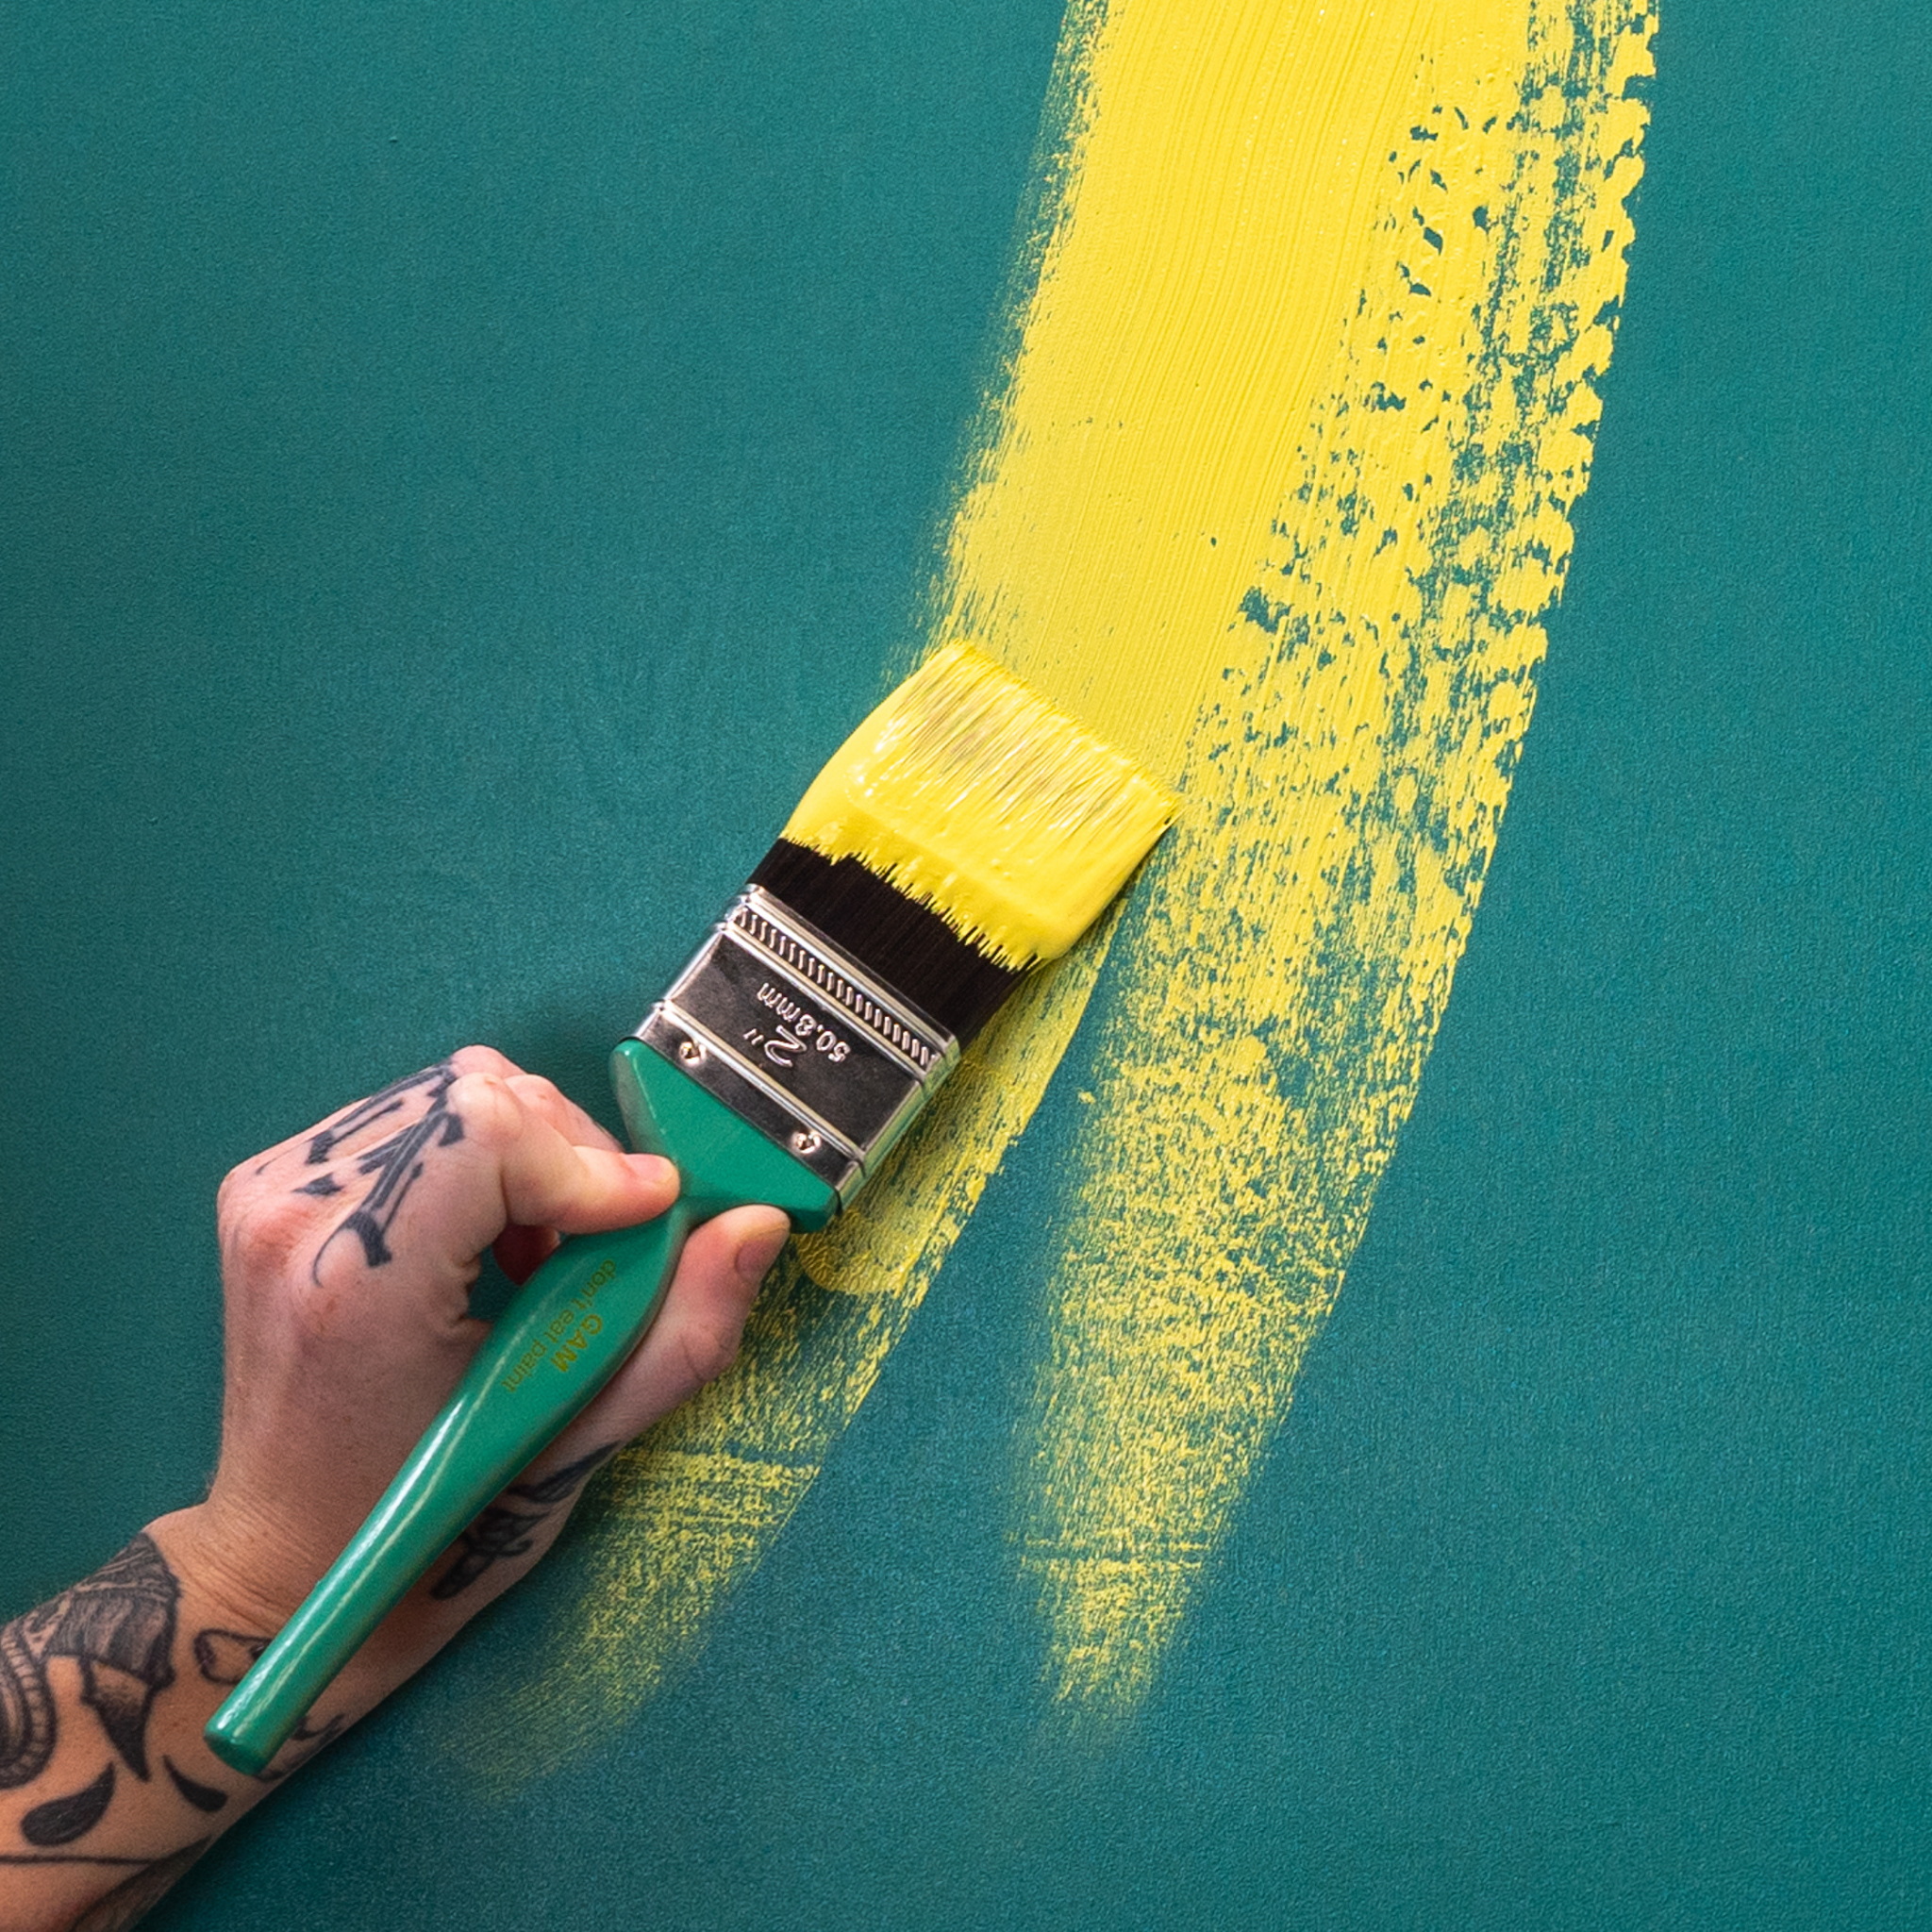 A tattooed artist's hand painting with yellow using a large paint brush